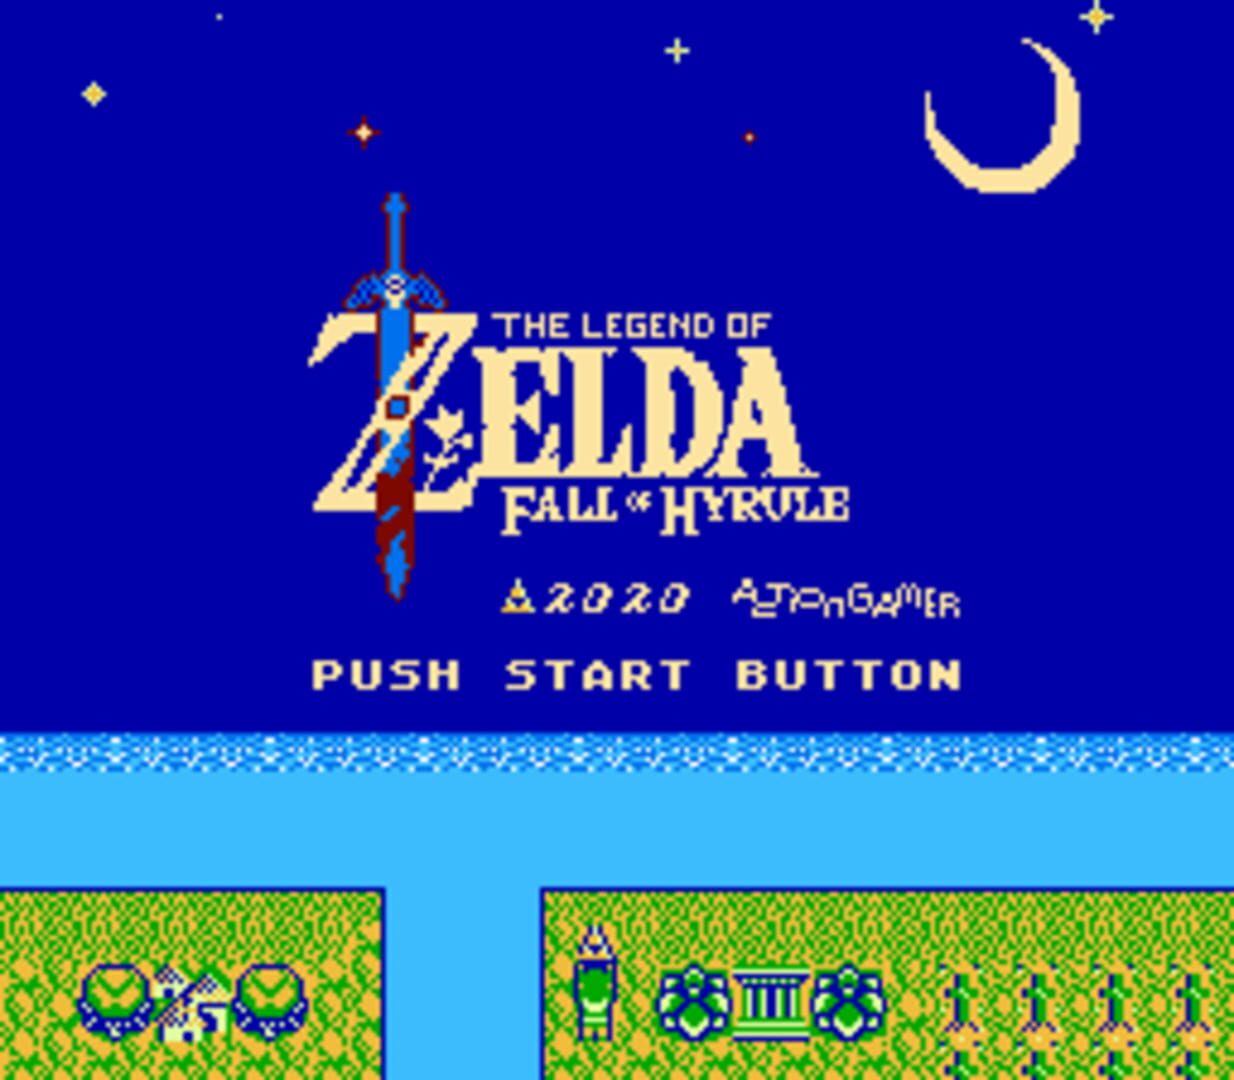 The Legend of Zelda: Fall of Hyrule featured image